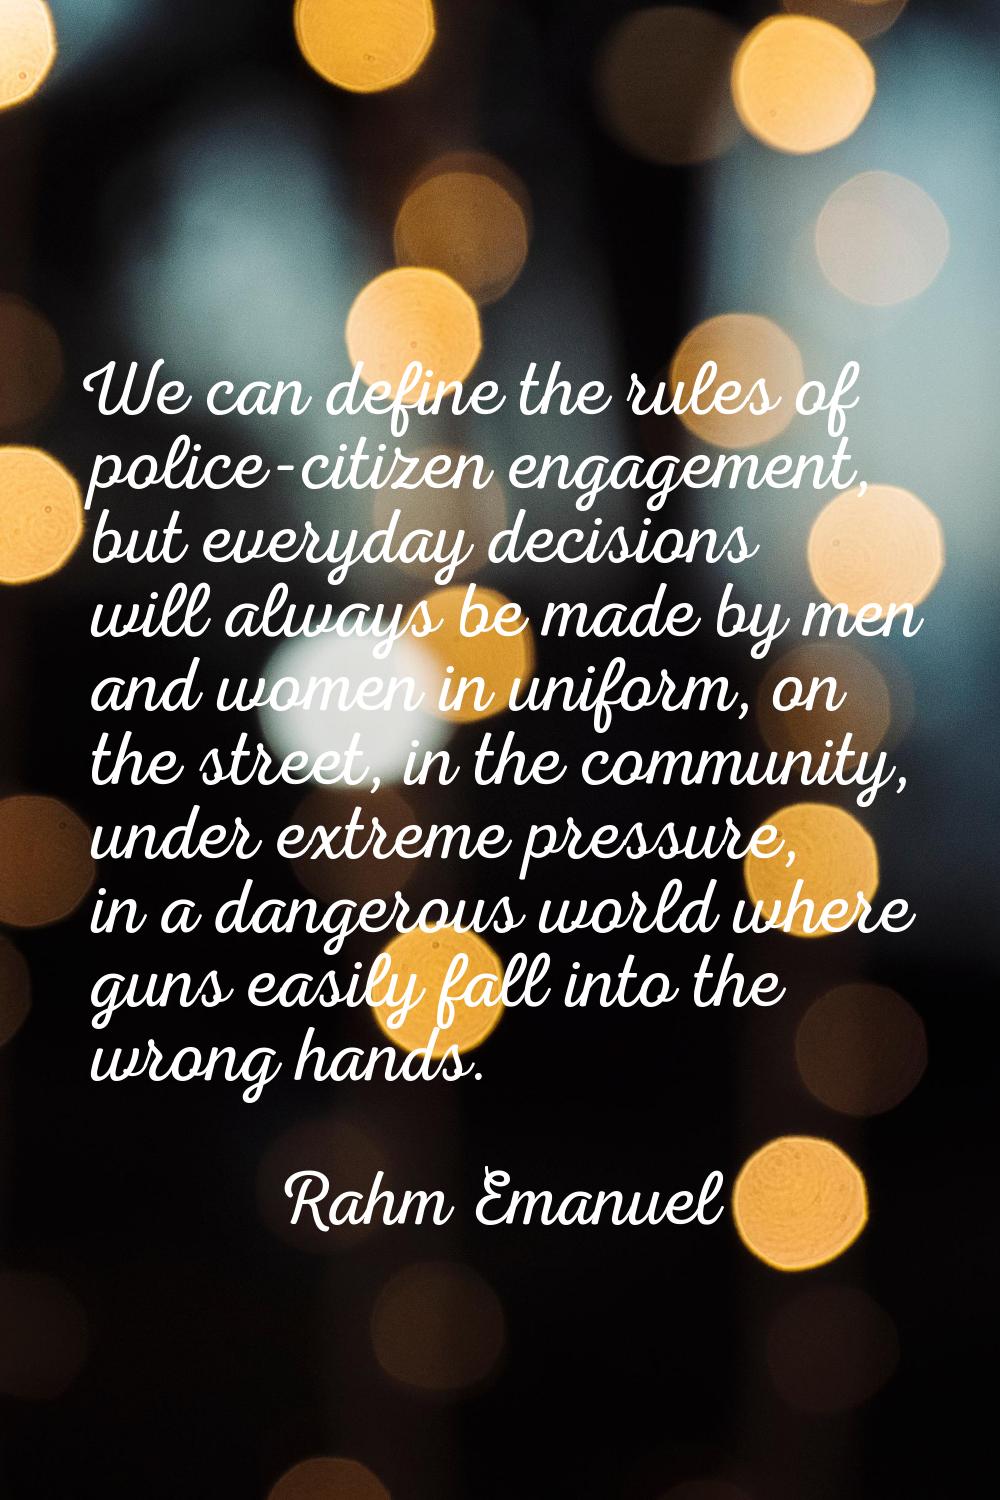 We can define the rules of police-citizen engagement, but everyday decisions will always be made by